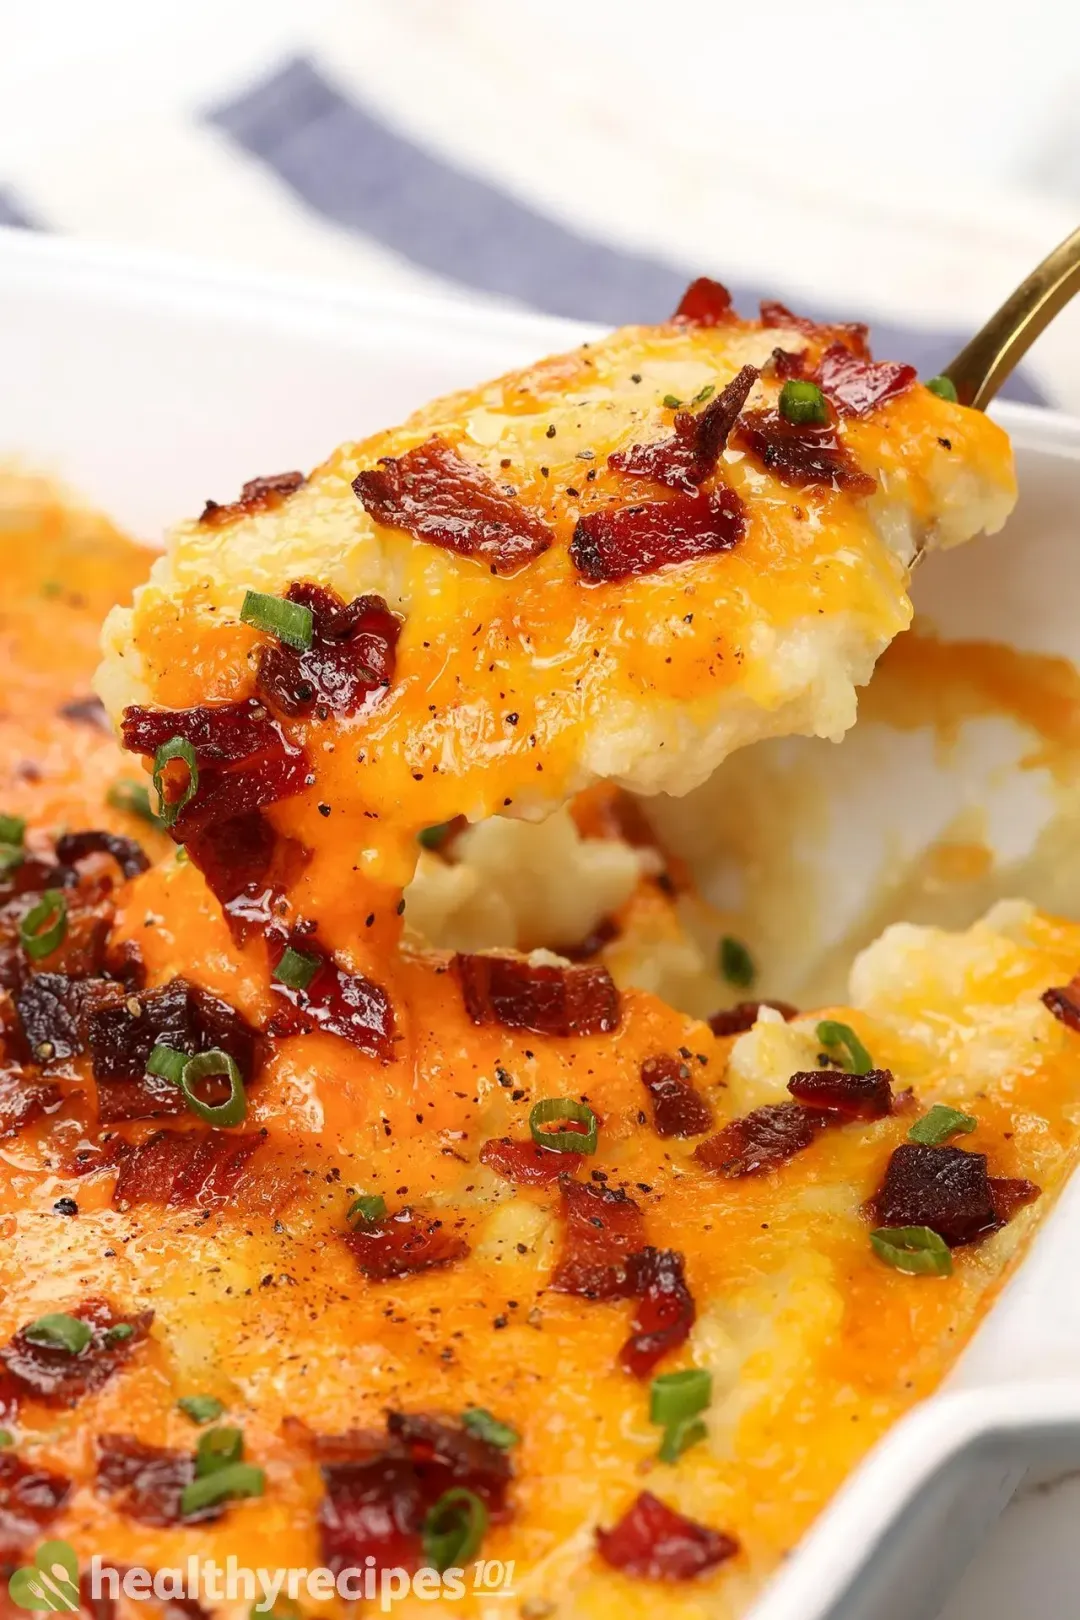 Twice Baked Cauliflower: How to Make a Healthy, Cheesy Side Dish